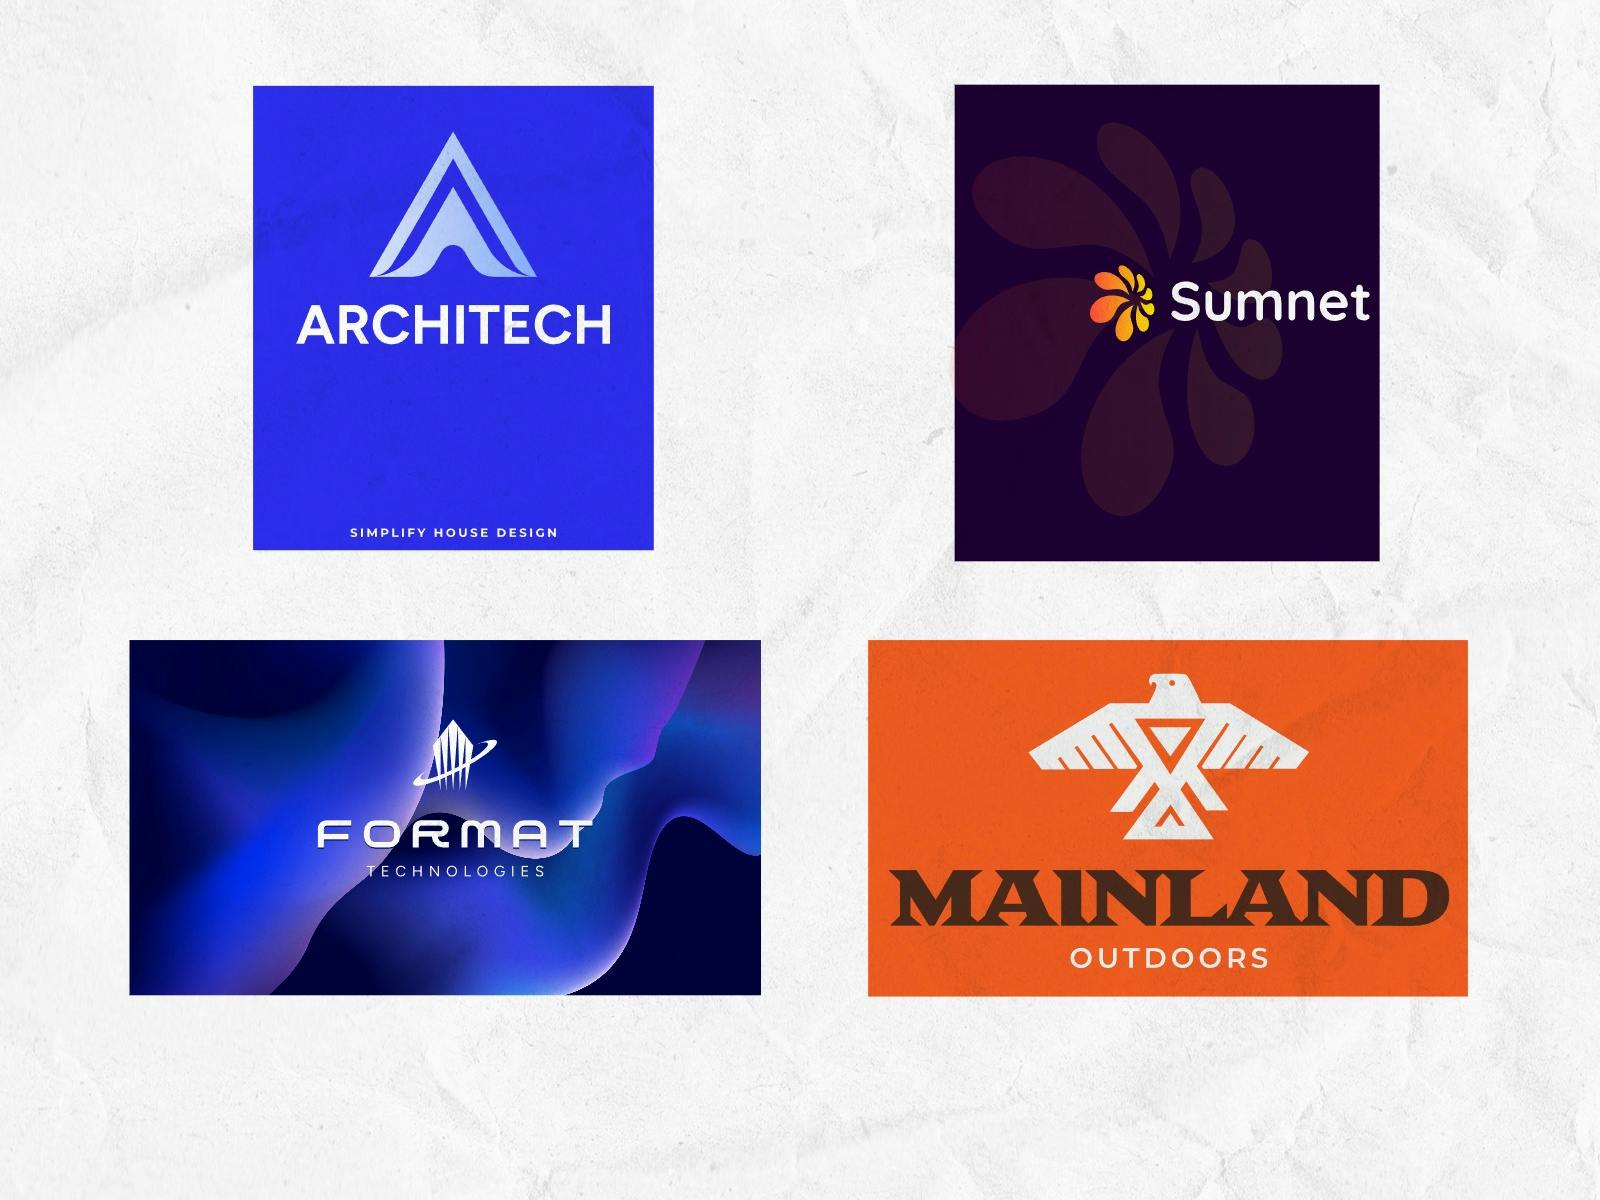 Top Geometric Tech Startup Logos showcased in Kittl - Innovative Designs and Shapes for the Modern Era